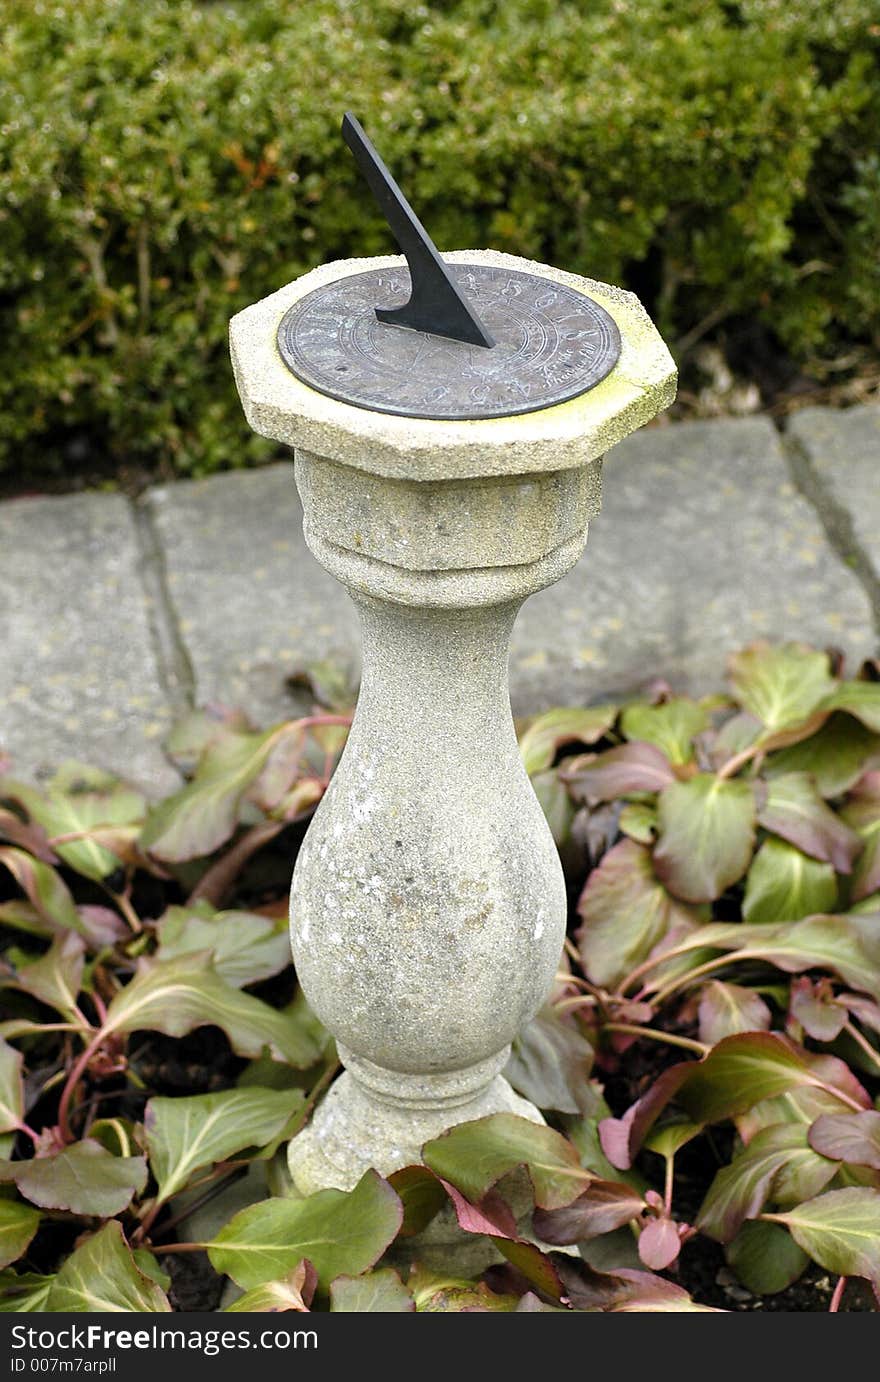 A sundial on a pillar in an English country garden. A sundial on a pillar in an English country garden